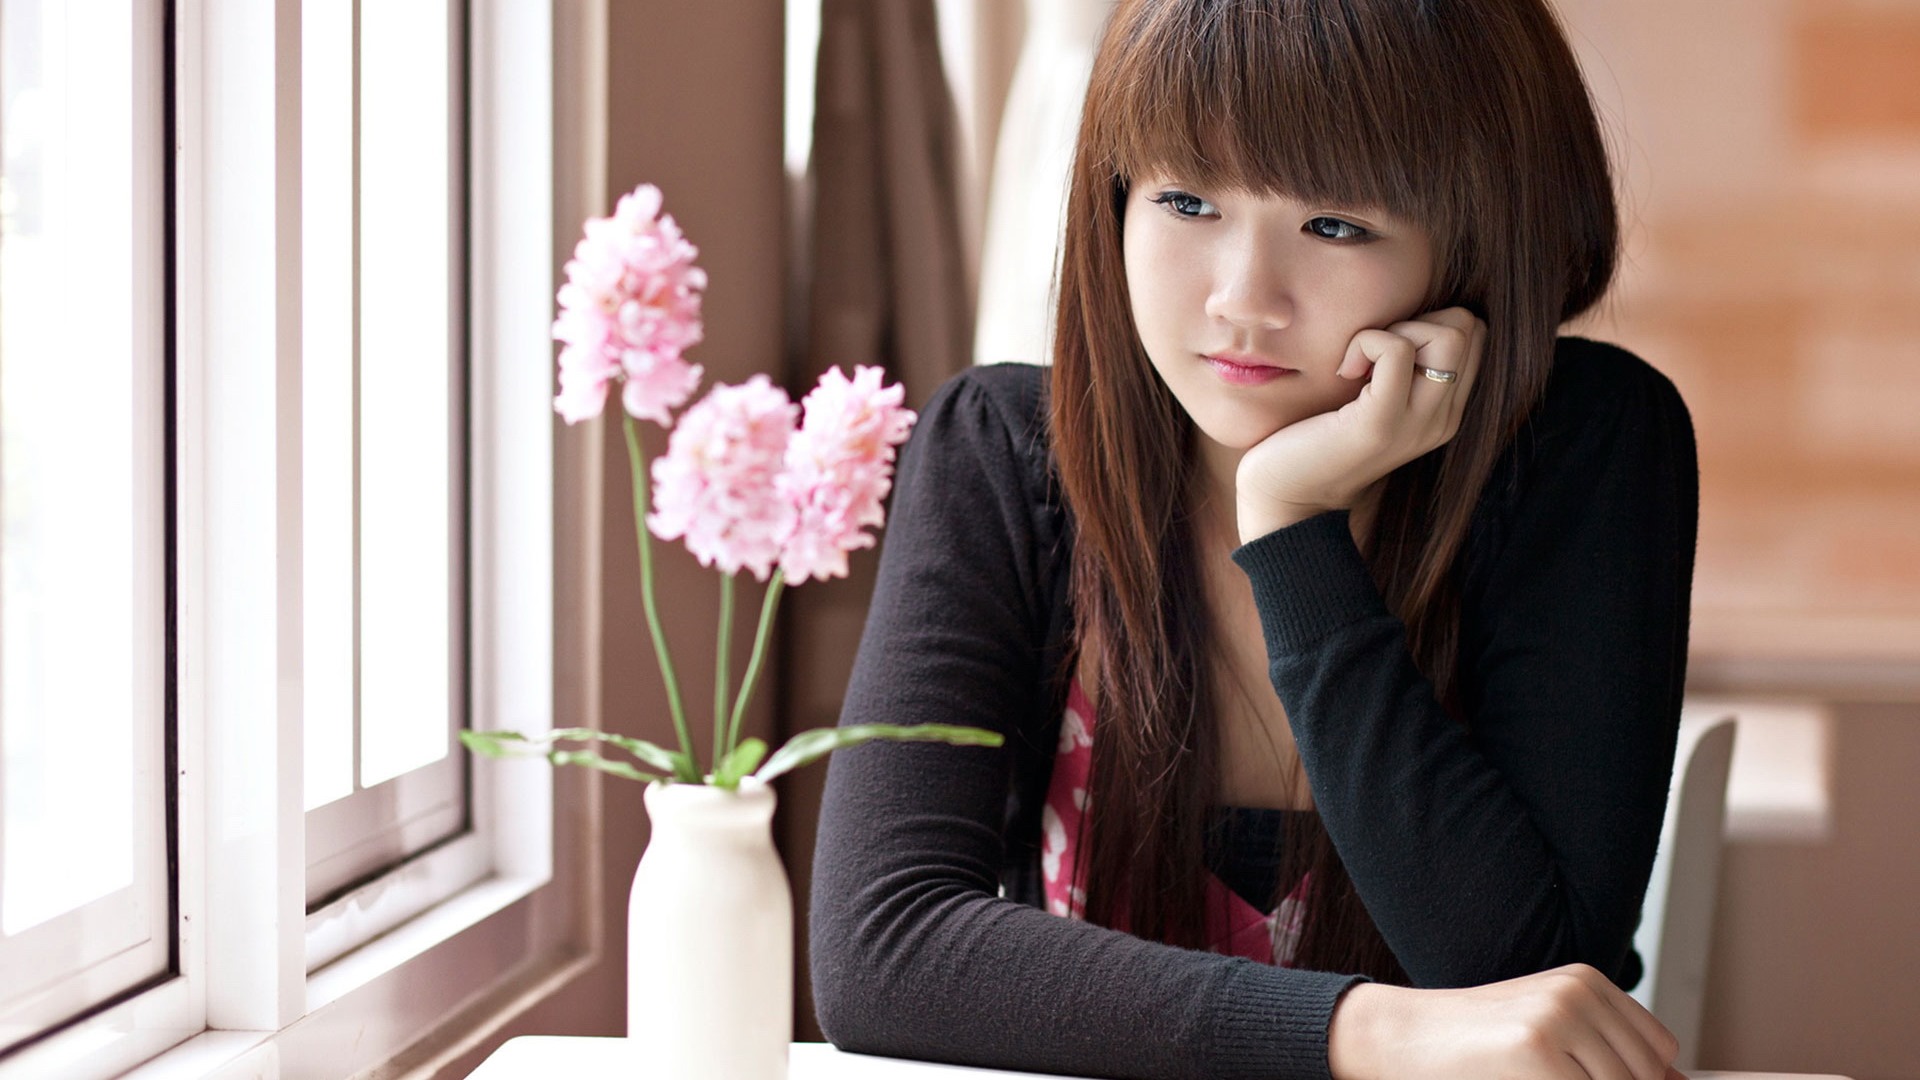 Pure and lovely young Asian girl HD wallpapers collection (2) #24 - 1920x1080